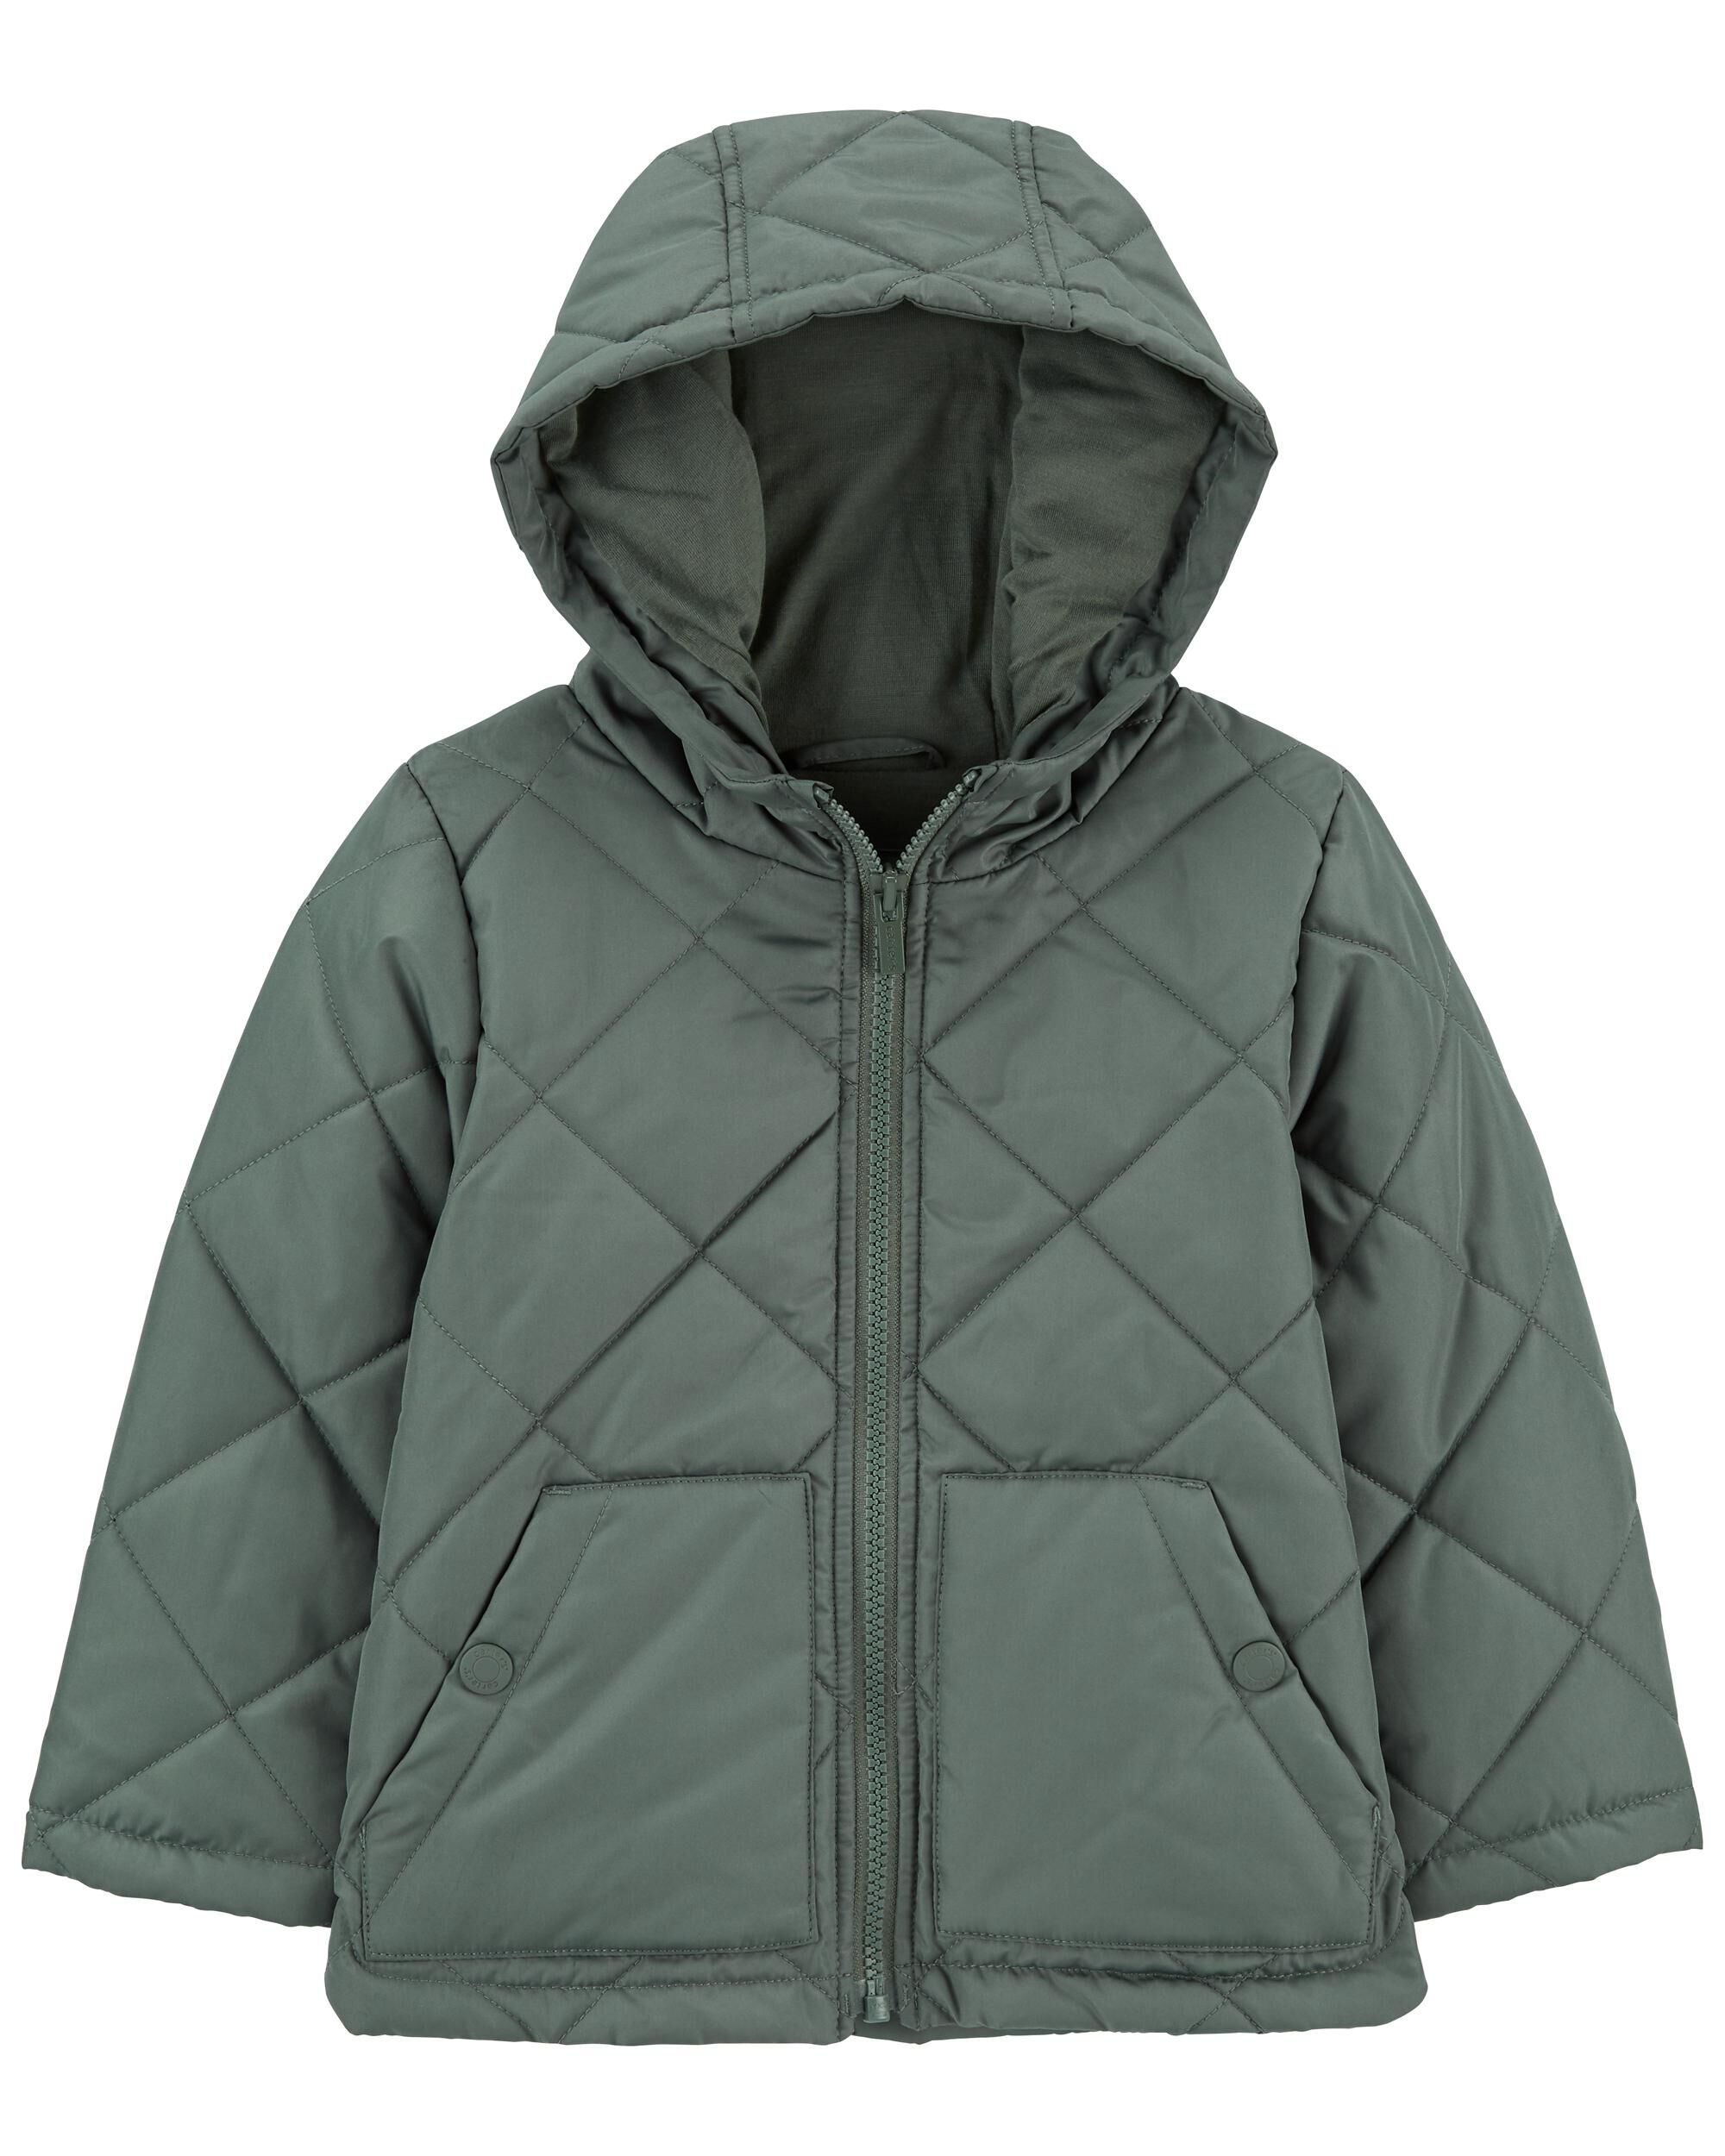 Details about   Genuine Kids from Oshkosh Hooded Jackets size 12M & 3T 